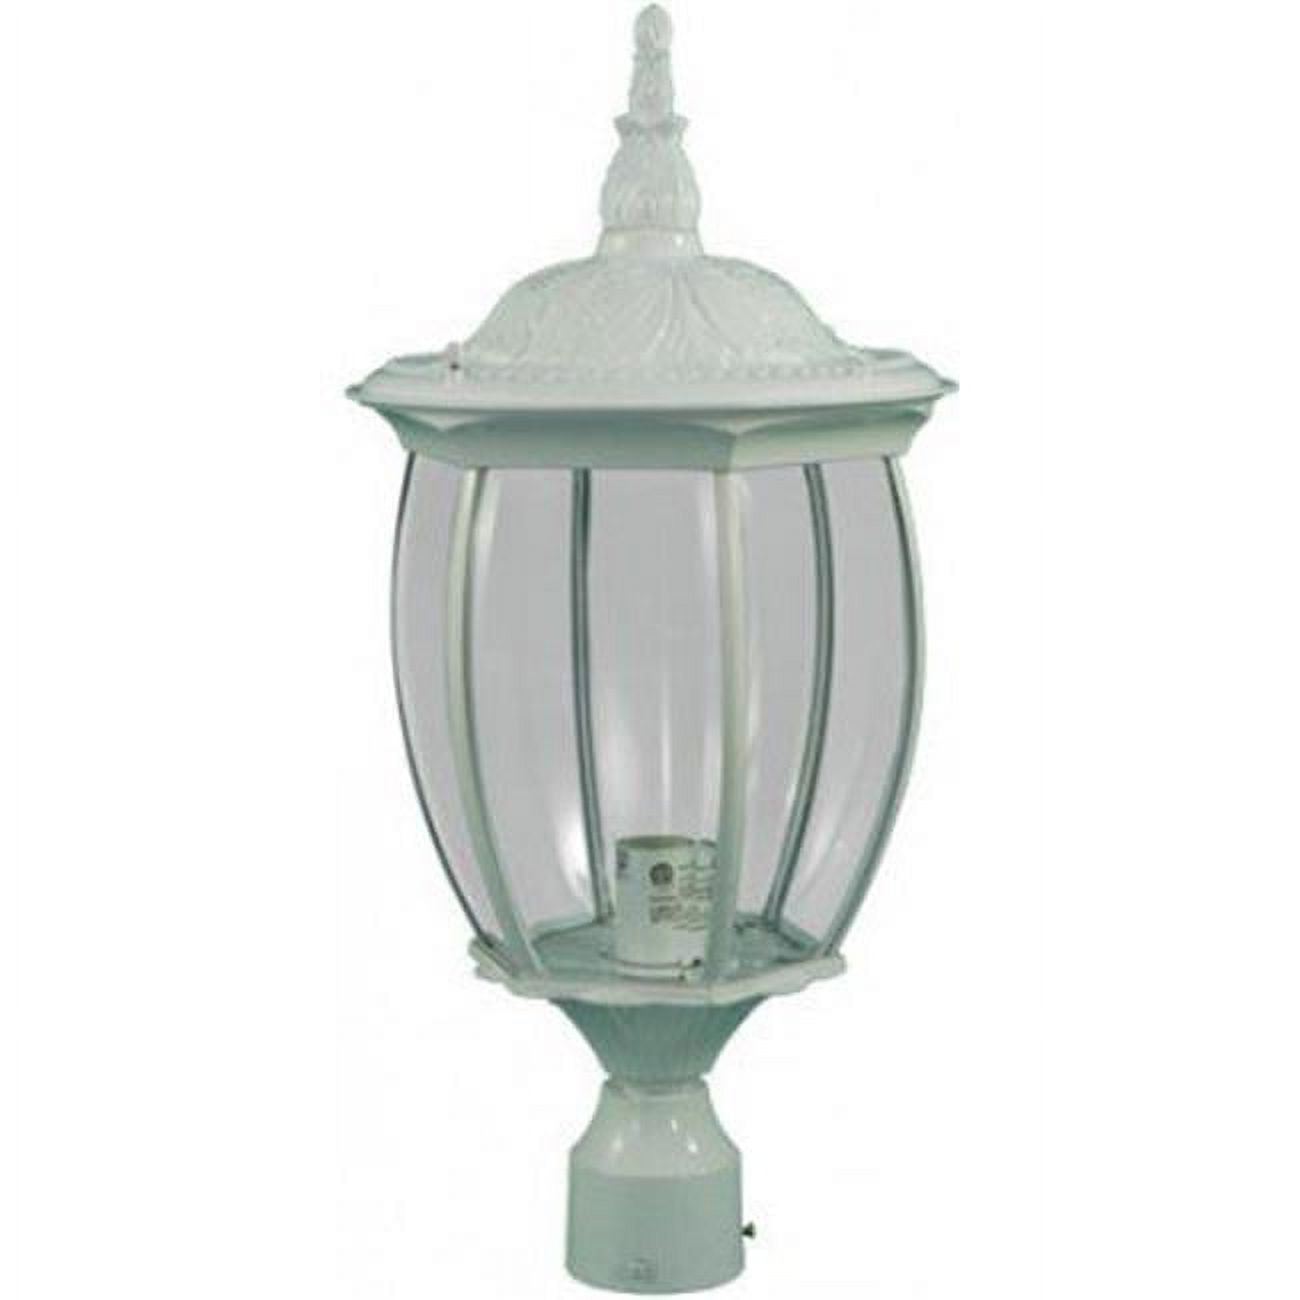 Picture of Dabmar Lighting GM102-13-W 13W & 120V S13-GU24 Victoria Post Top Light Fixture - White